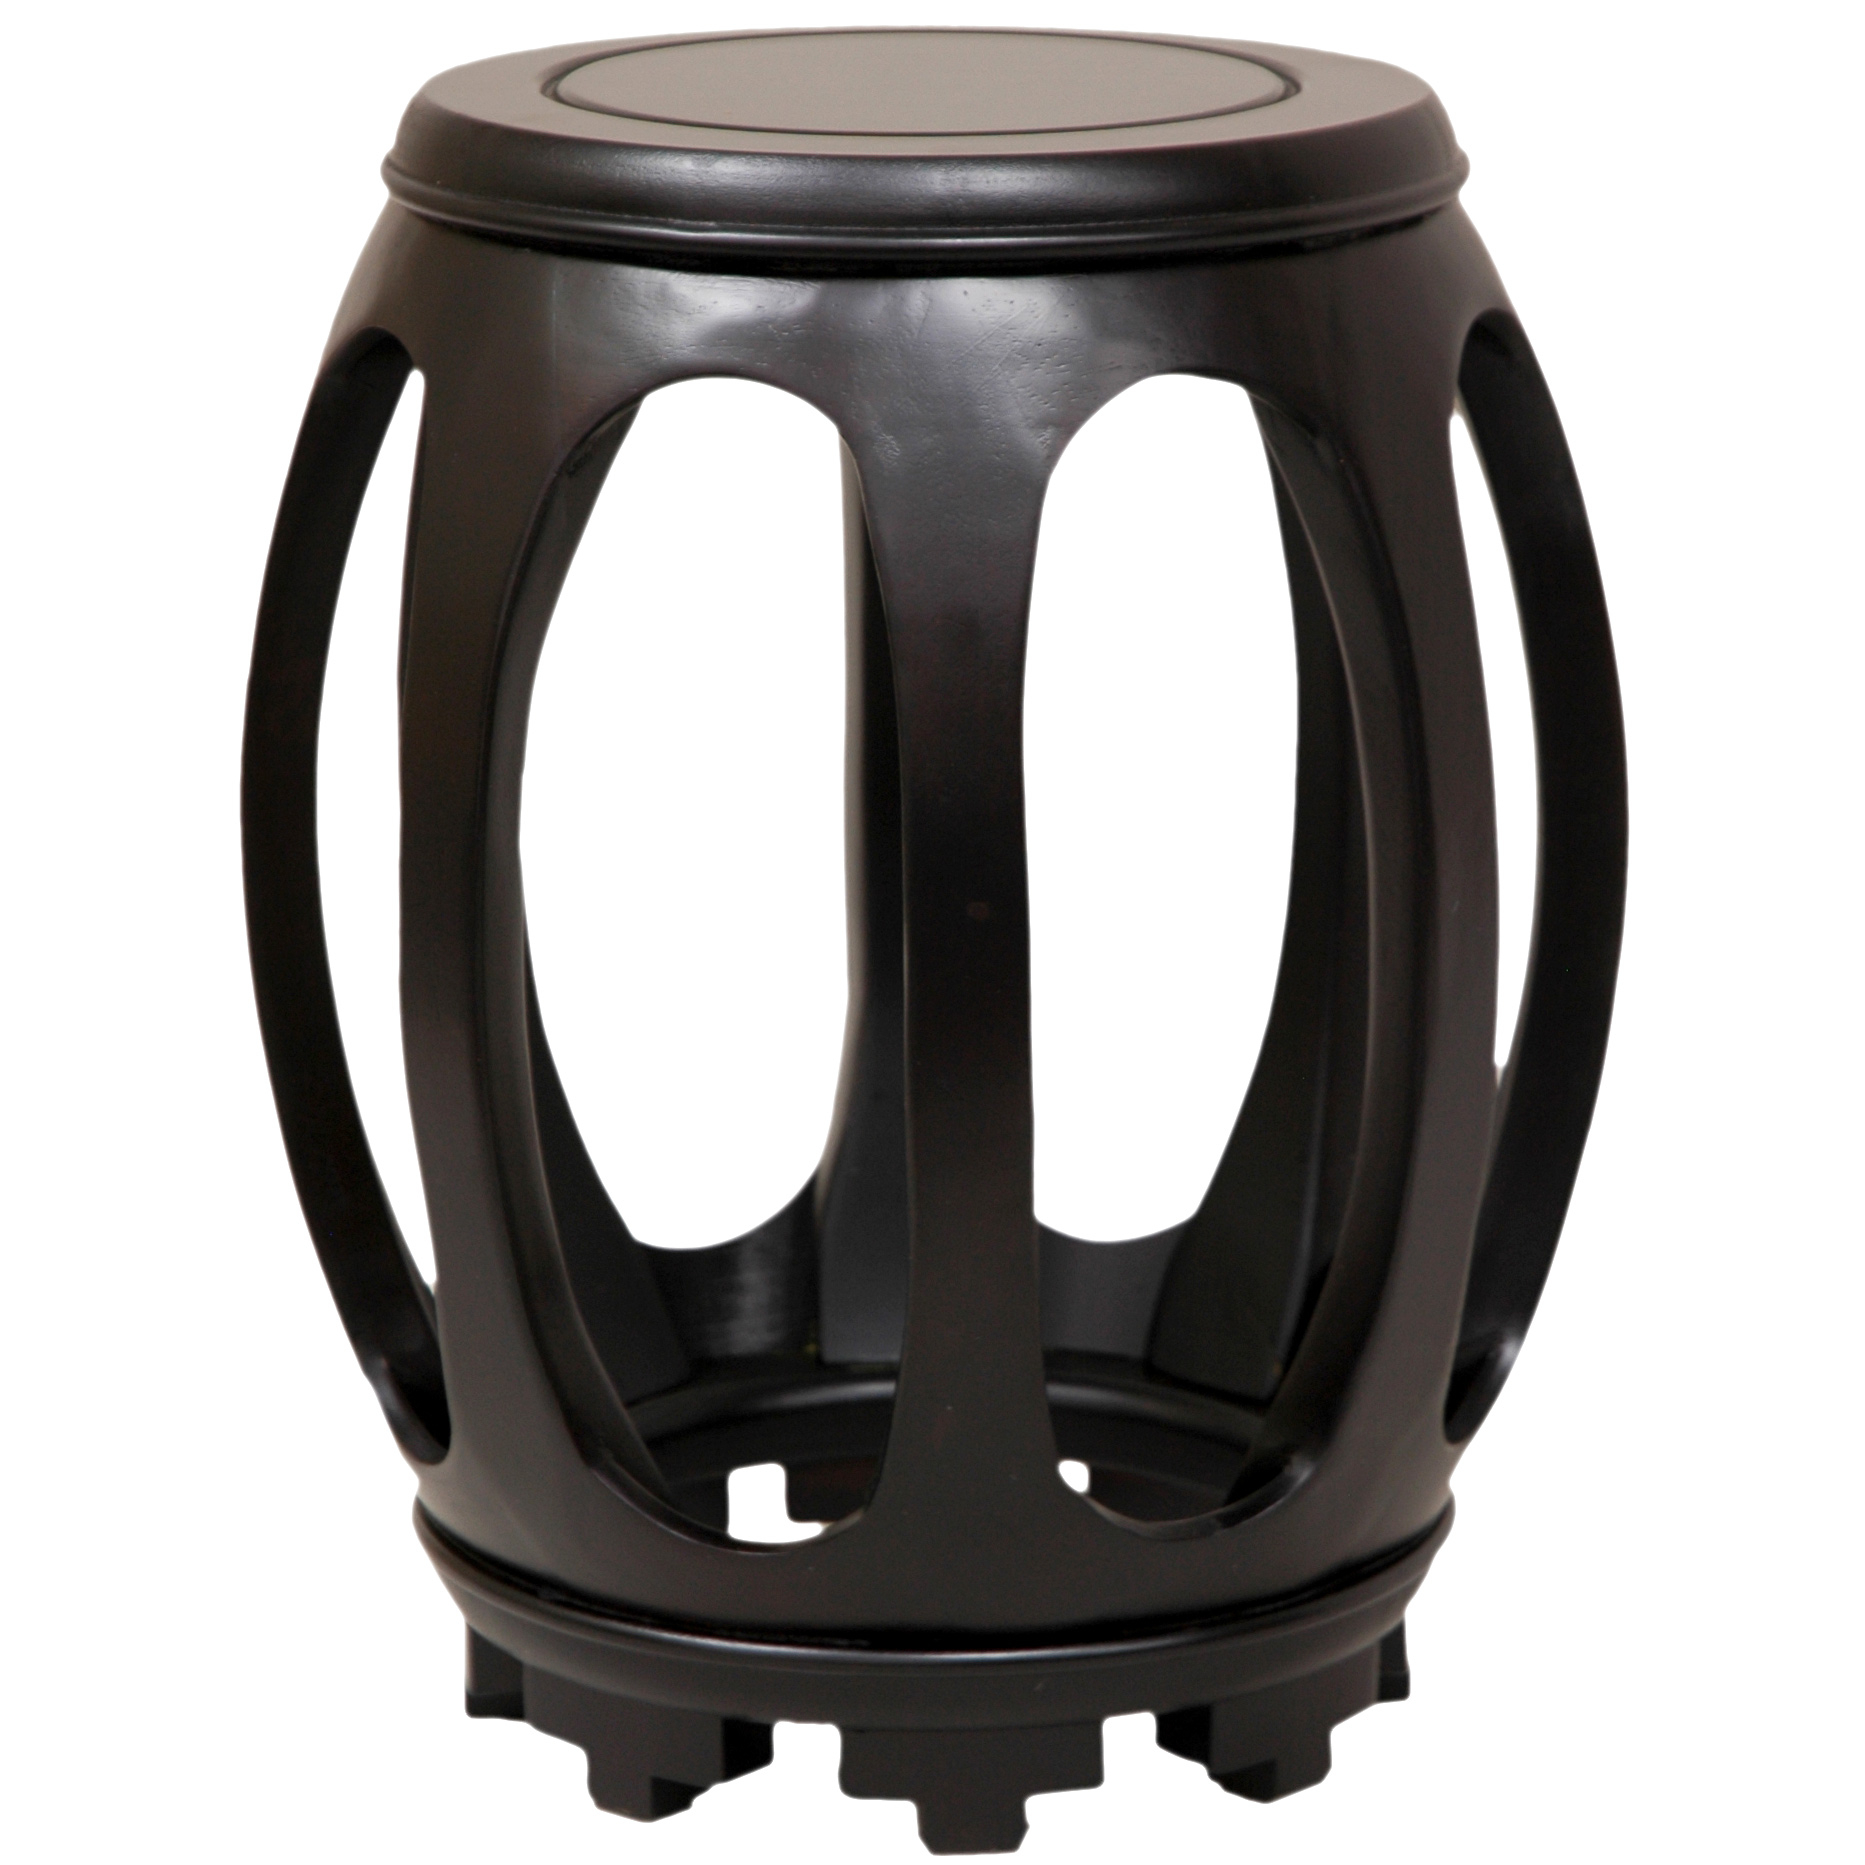 Oriental Furniture Classic Asian Furniture and Unique Gifts, 18-Inch Qing Rosewood Barrel Stool Planter Stand, Rosewood